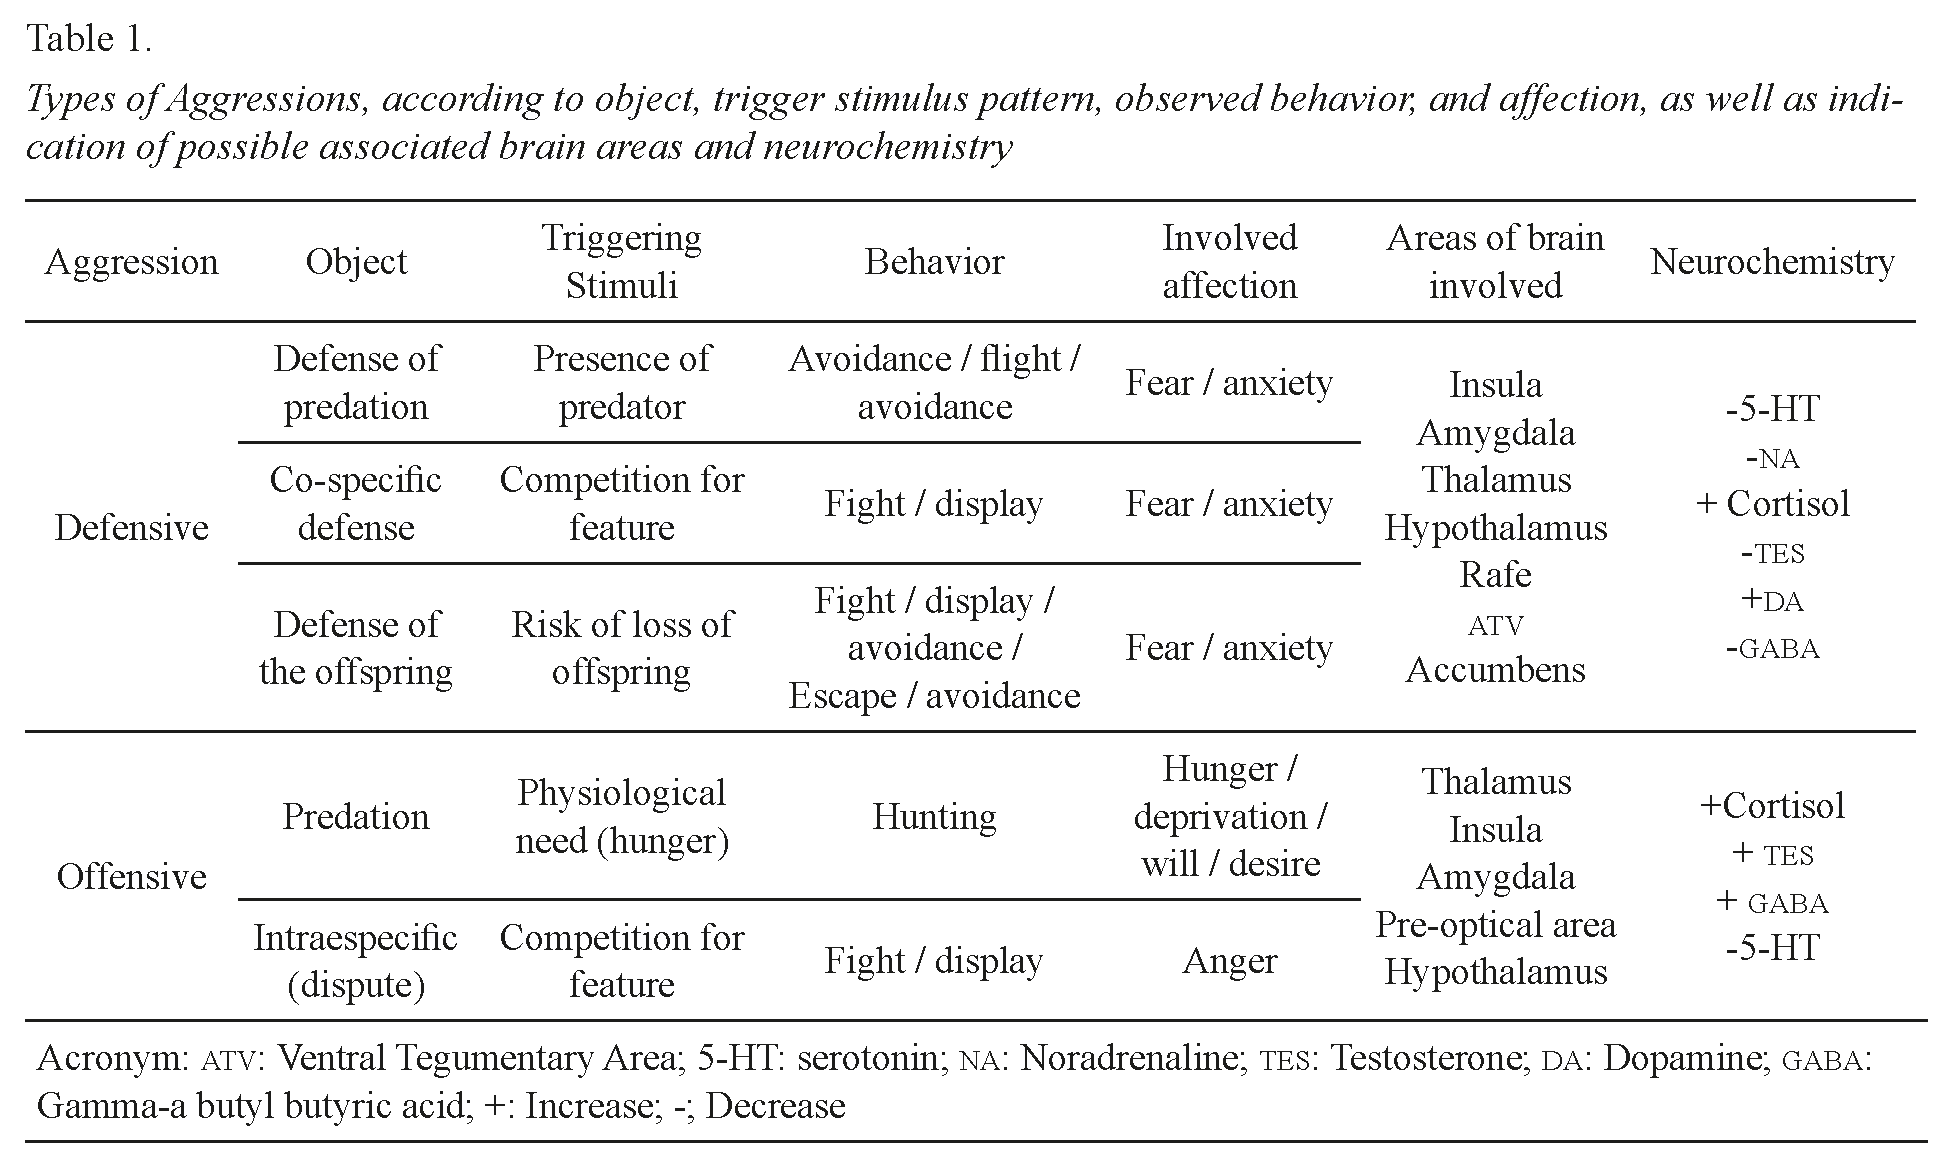 Types of Aggressions, according to object, trigger stimulus pattern, observed behavior, and affection, as well as indication of possible associated brain areas and neurochemistry